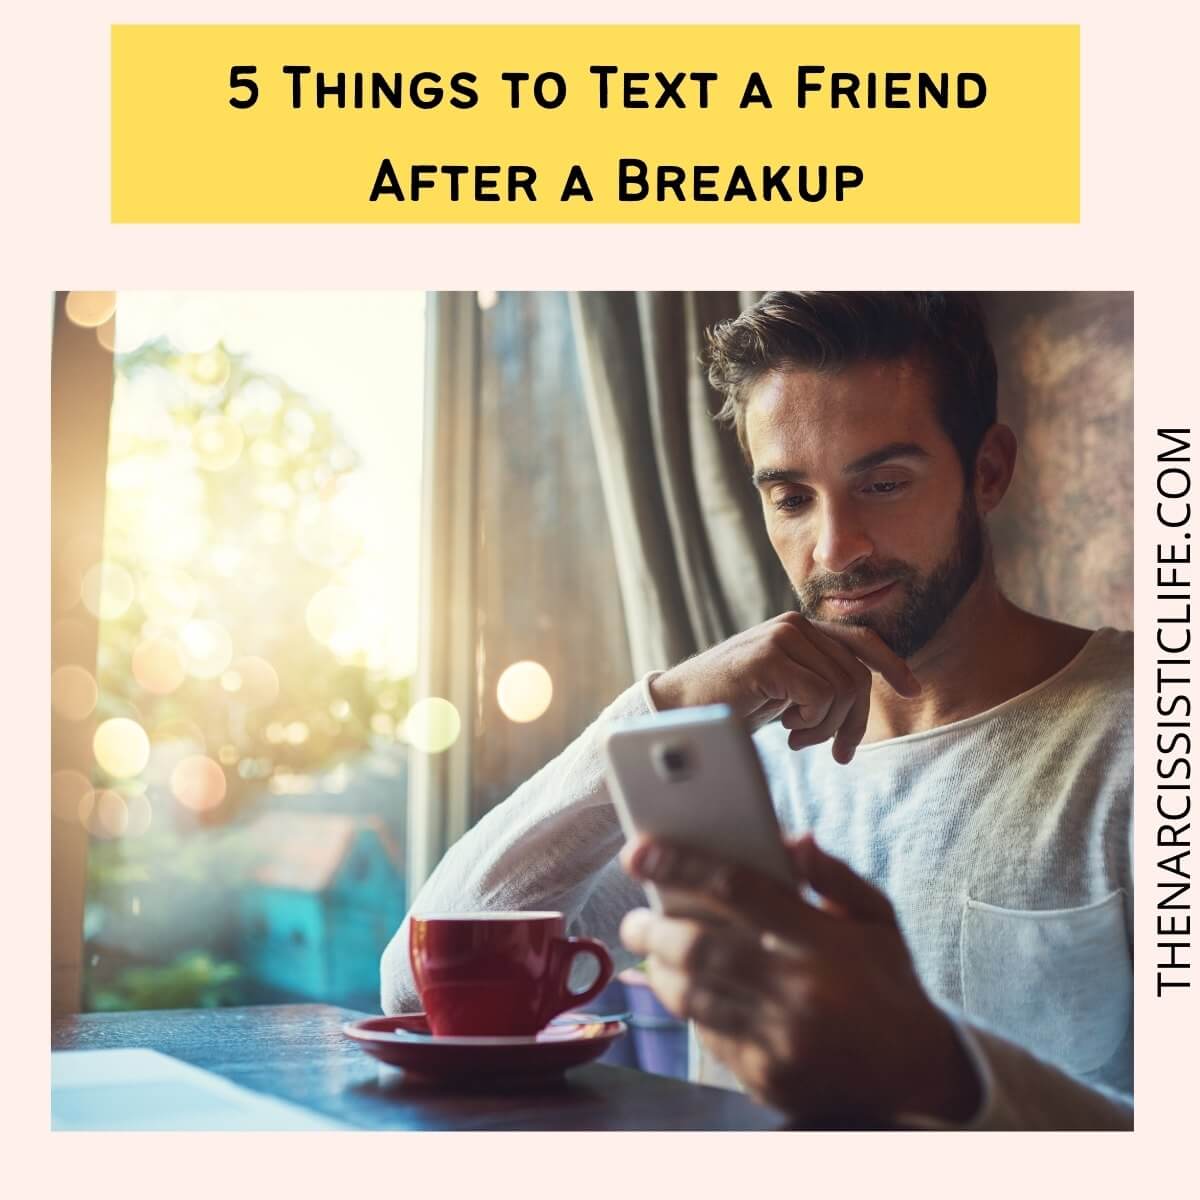 What to Say to a Friend Going Through a Breakup? 7 Things That Help